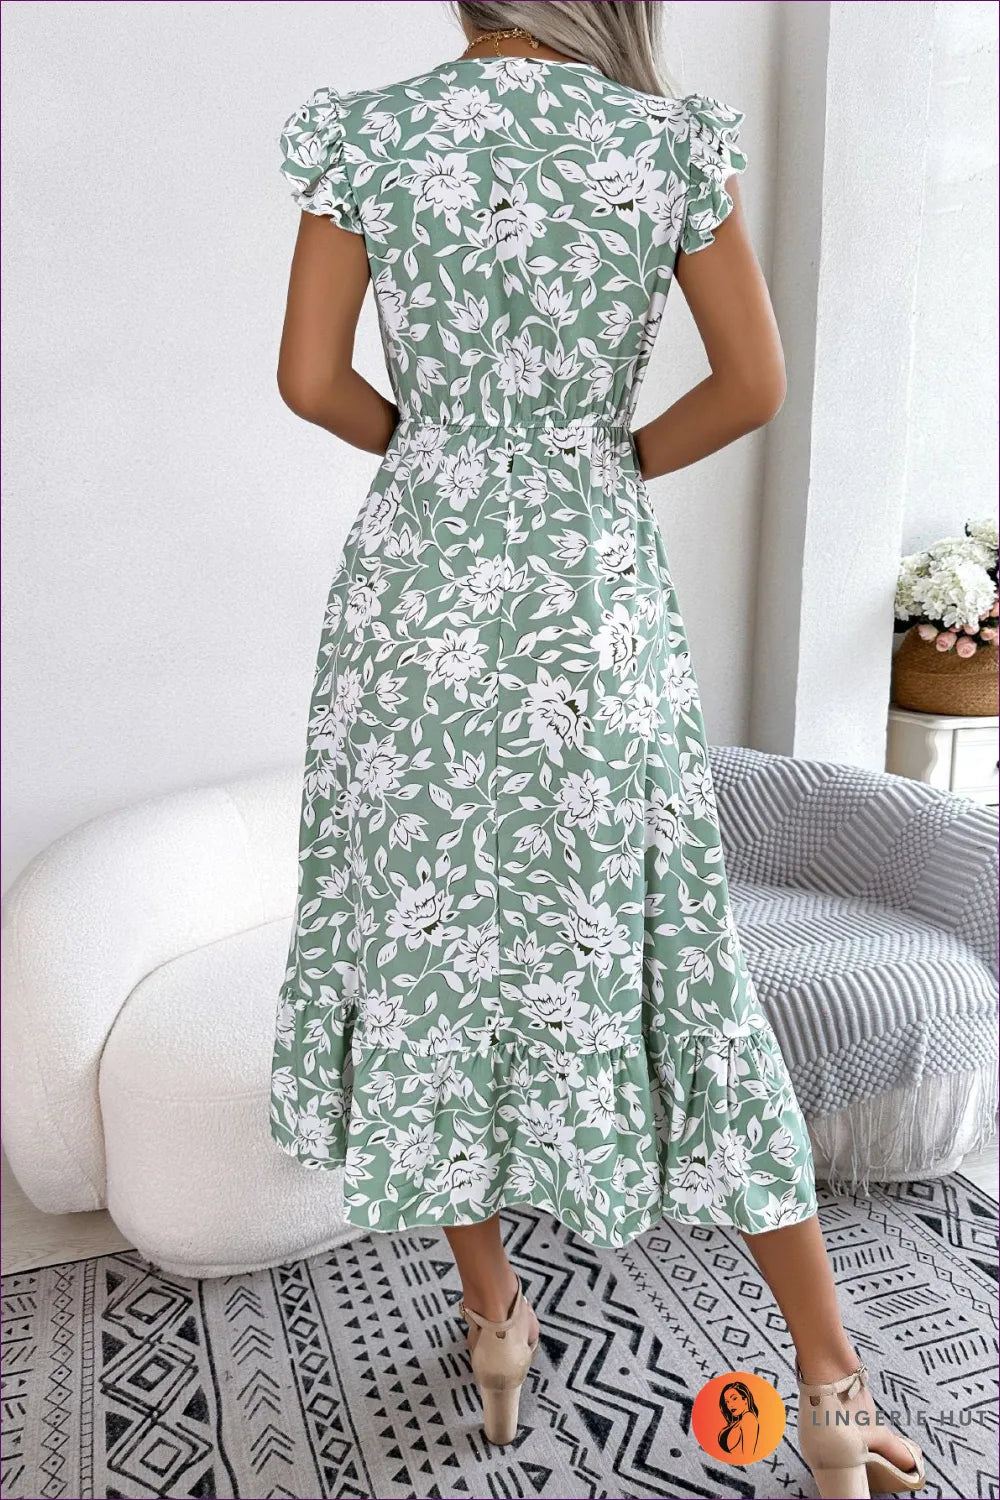 Elevate Your Vacation Style With Our Boho Floral Chiffon Maxi Dress. Crafted For Romance And Femininity, This